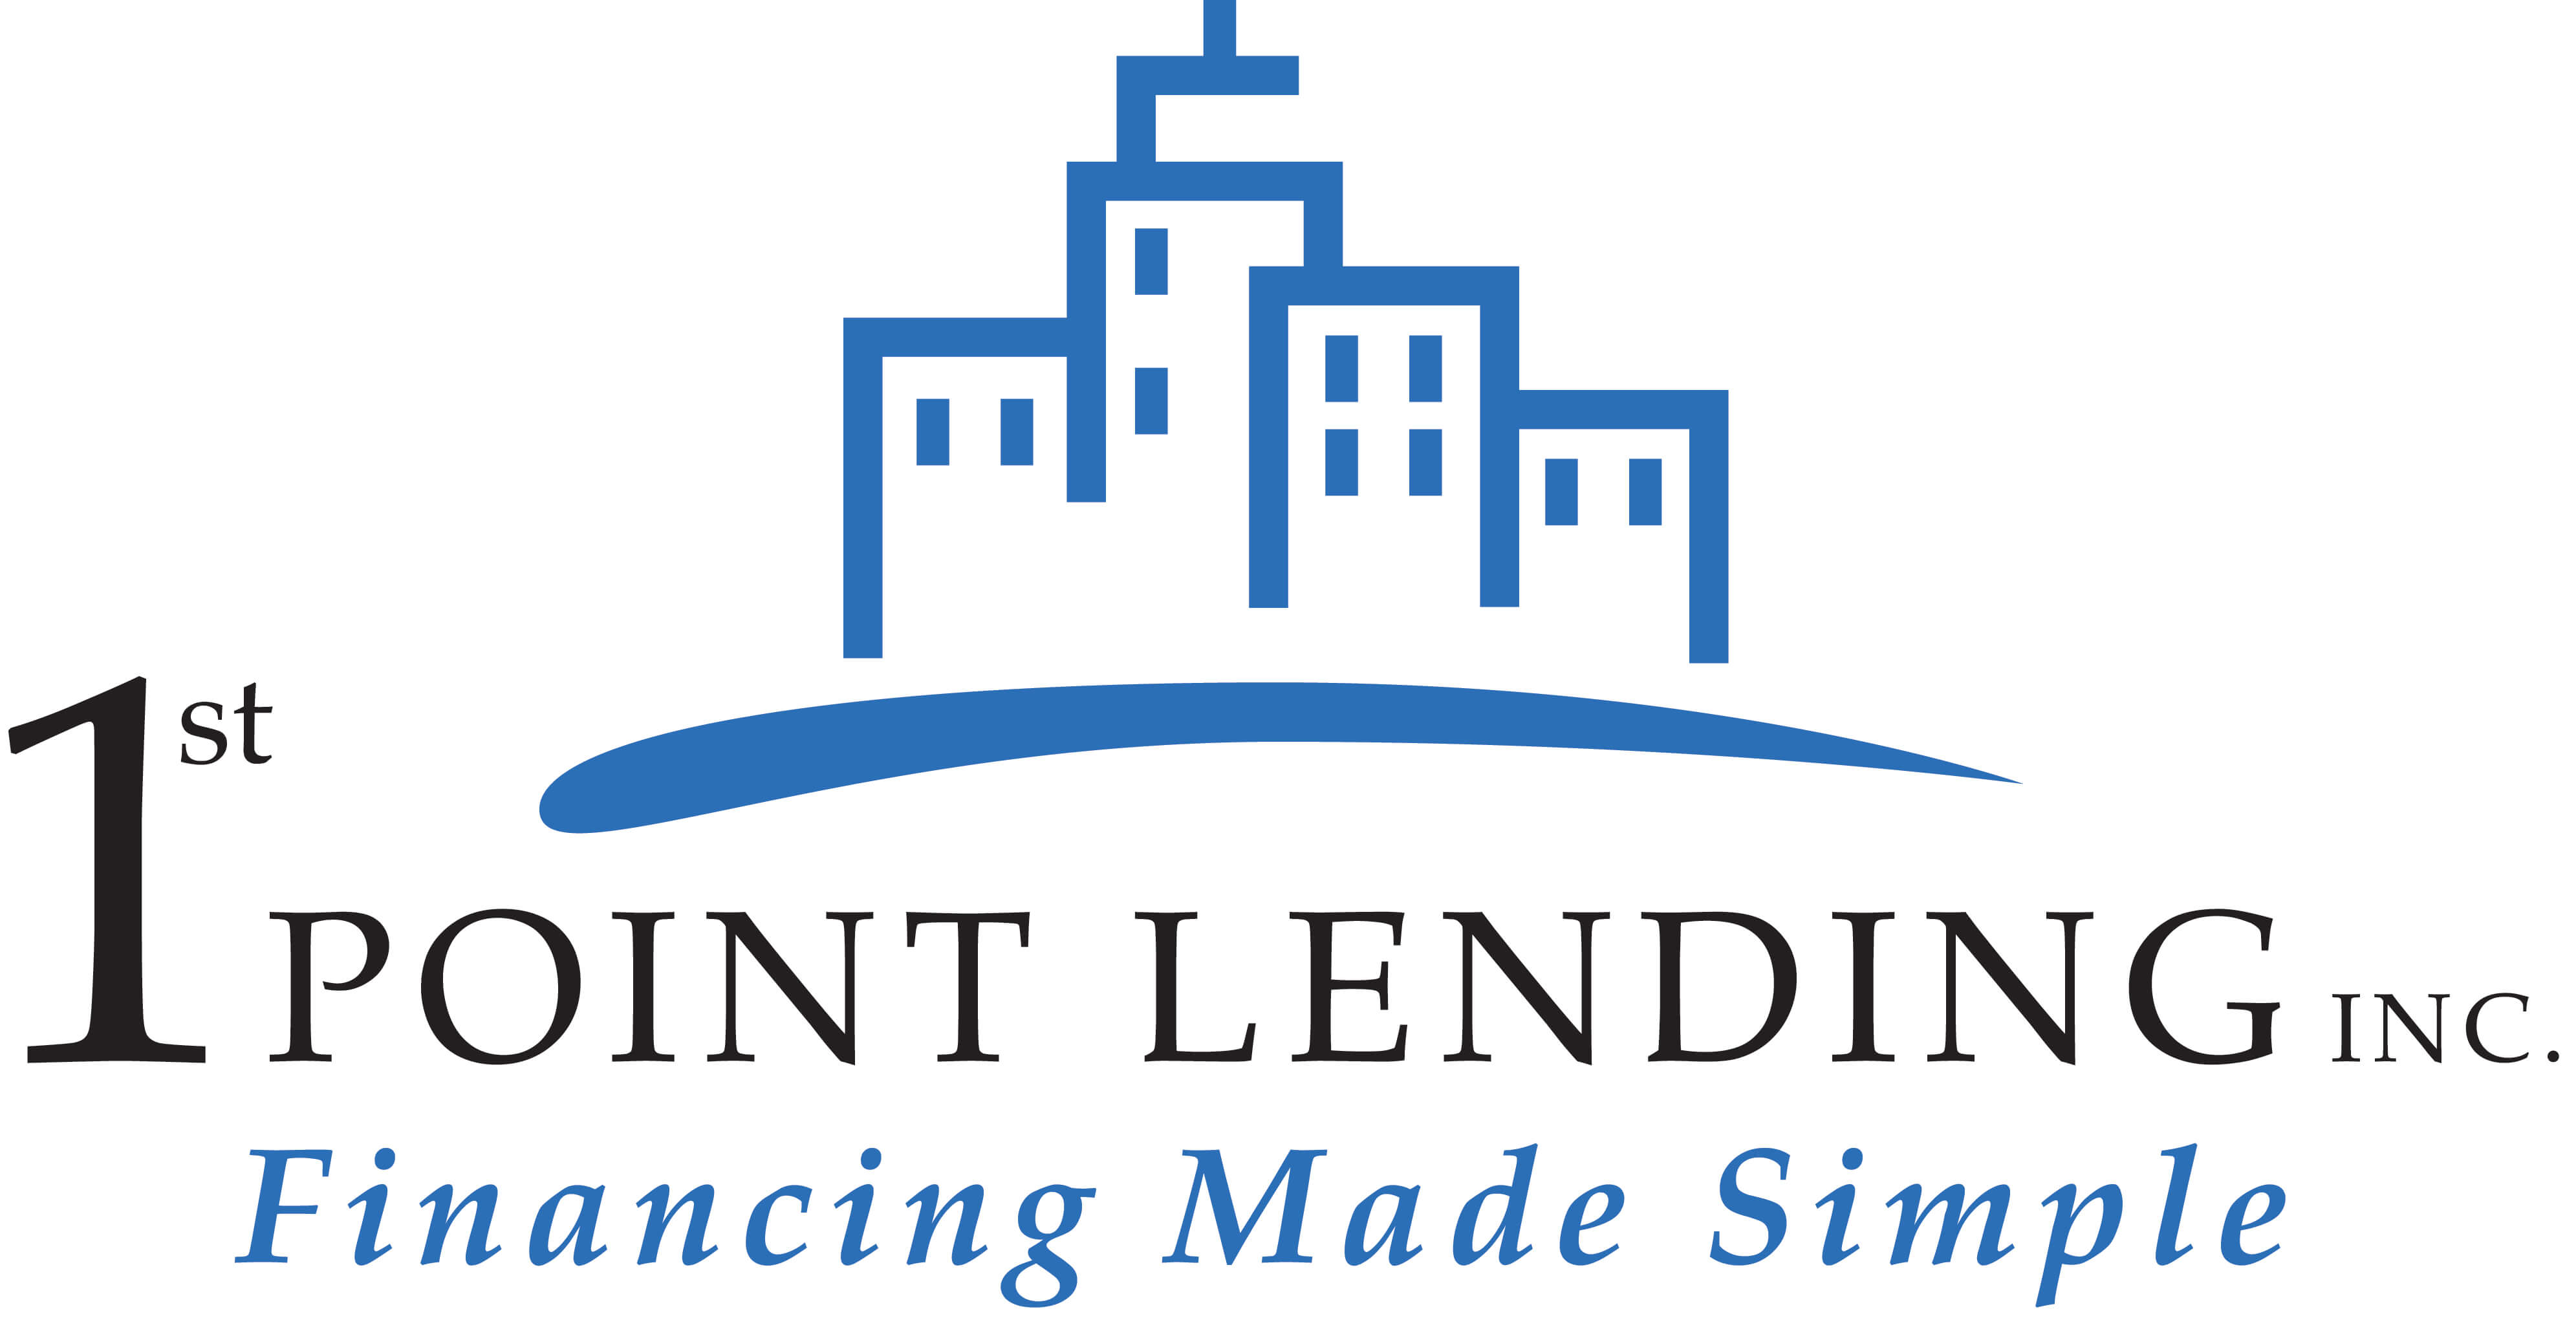 Lending Logo - Real Estate Brokers and Home Loans in Los Angeles: 1st